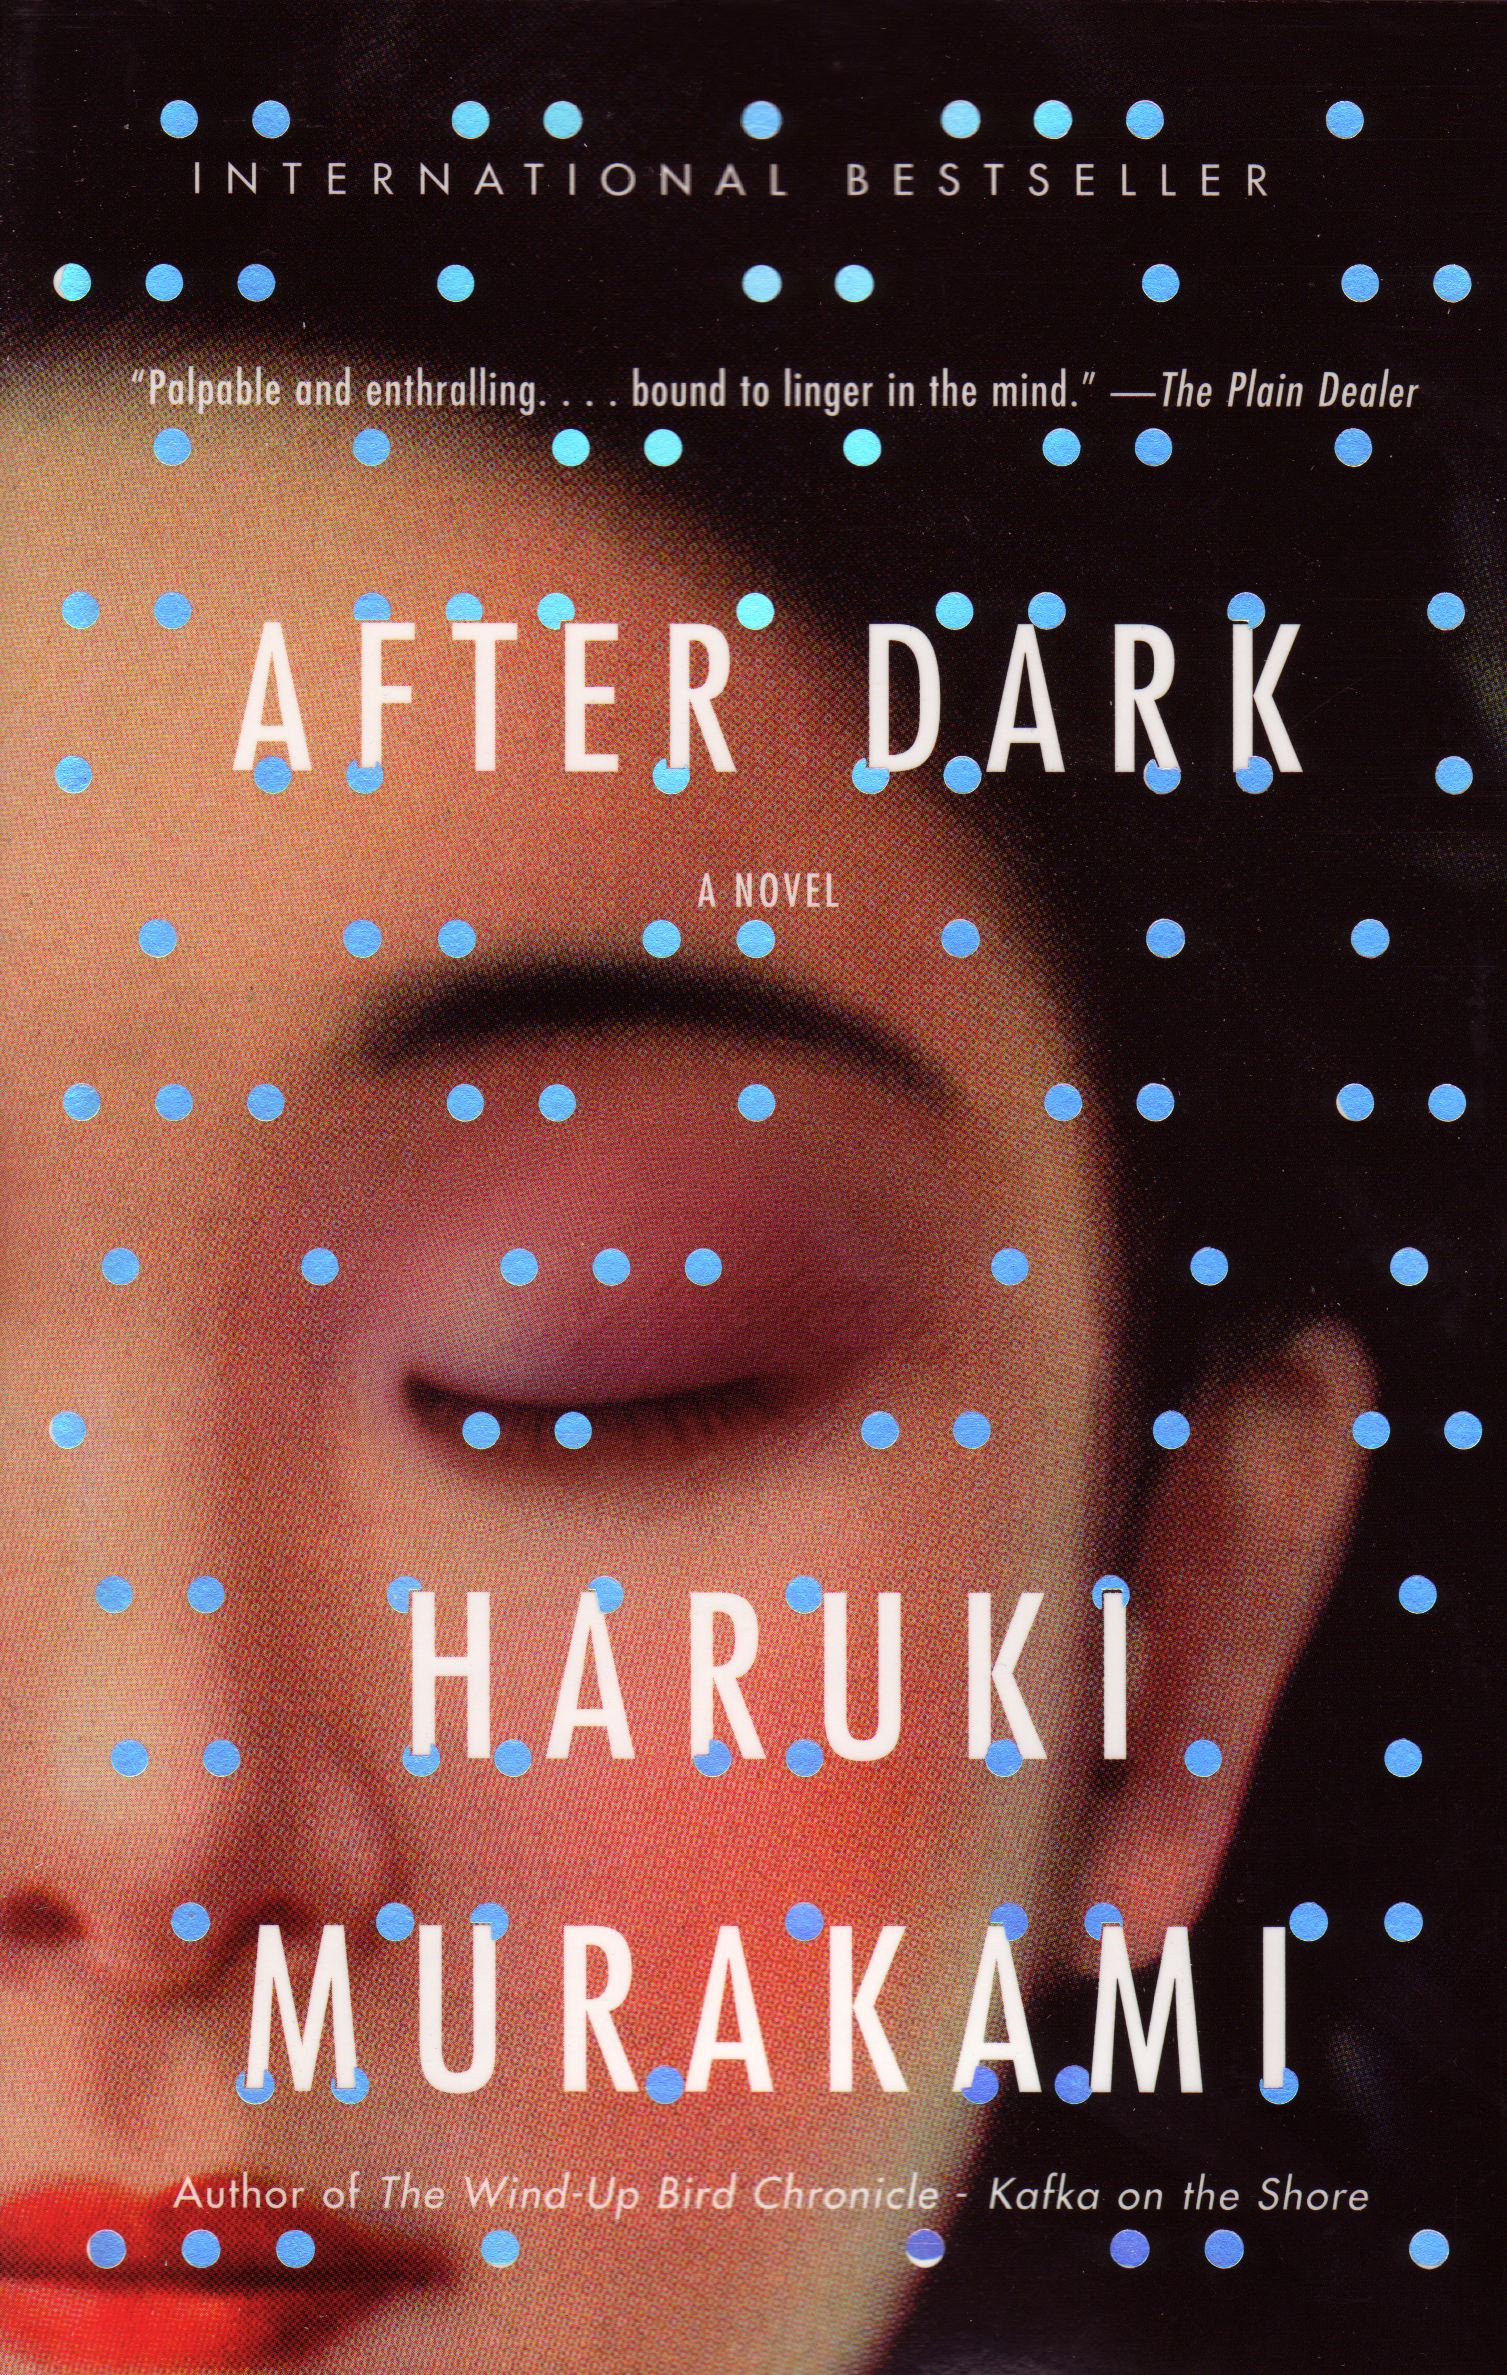 After Dark Cover Image